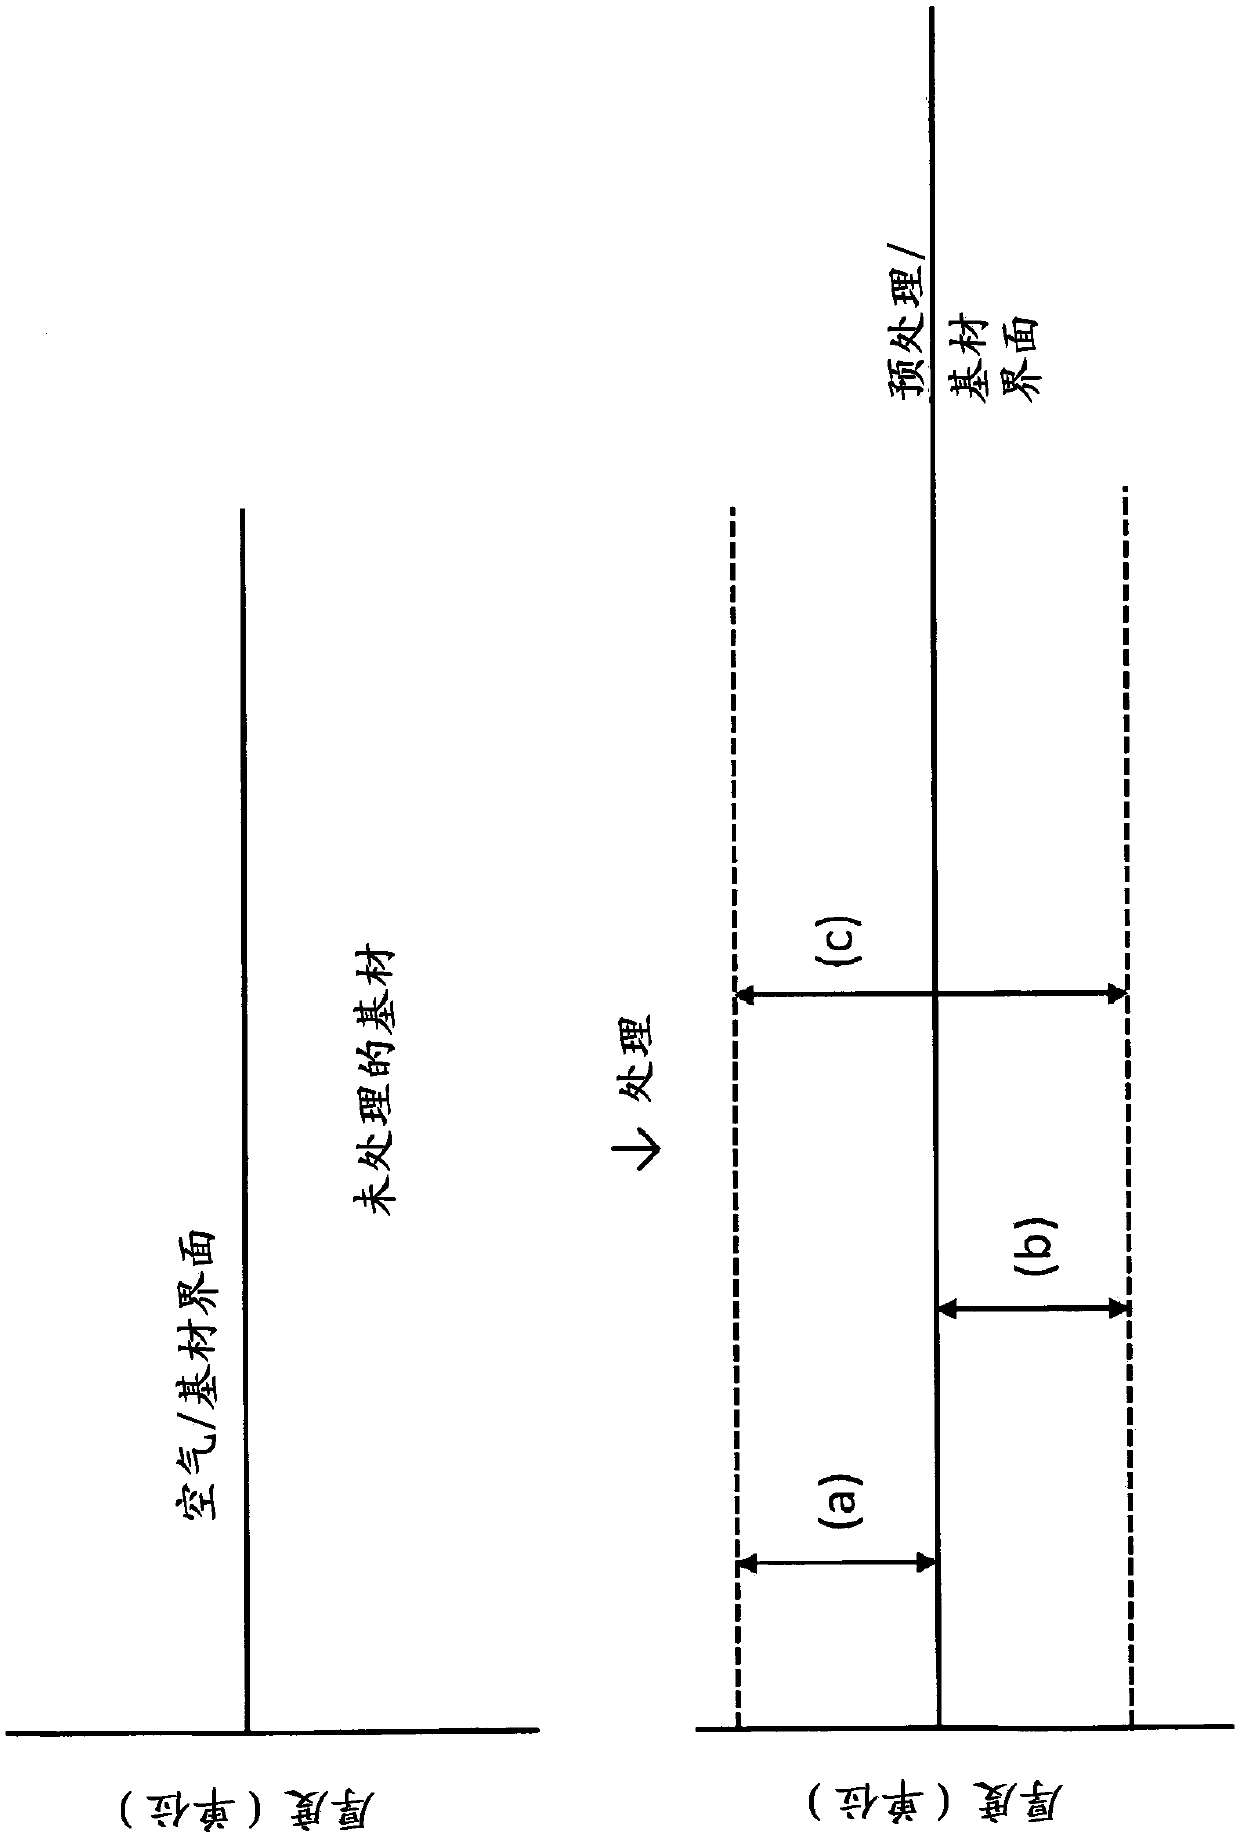 Systems and methods for treating a metal substrate